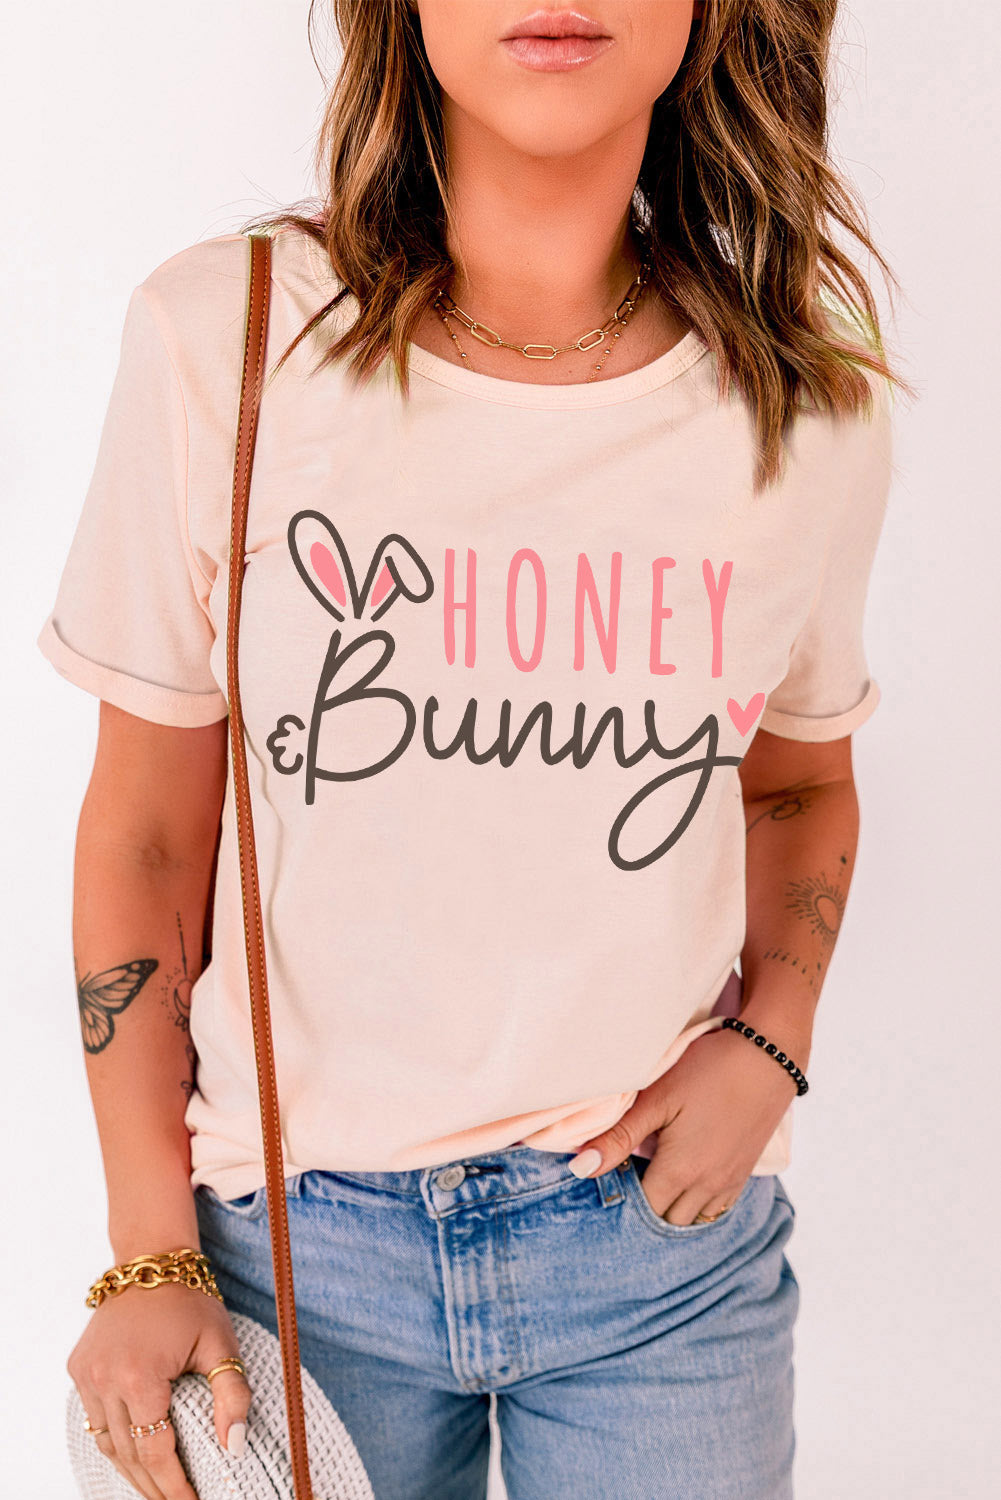 HONEY BUNNY Graphic Easter Tee - T-Shirts - Shirts & Tops - 5 - 2024